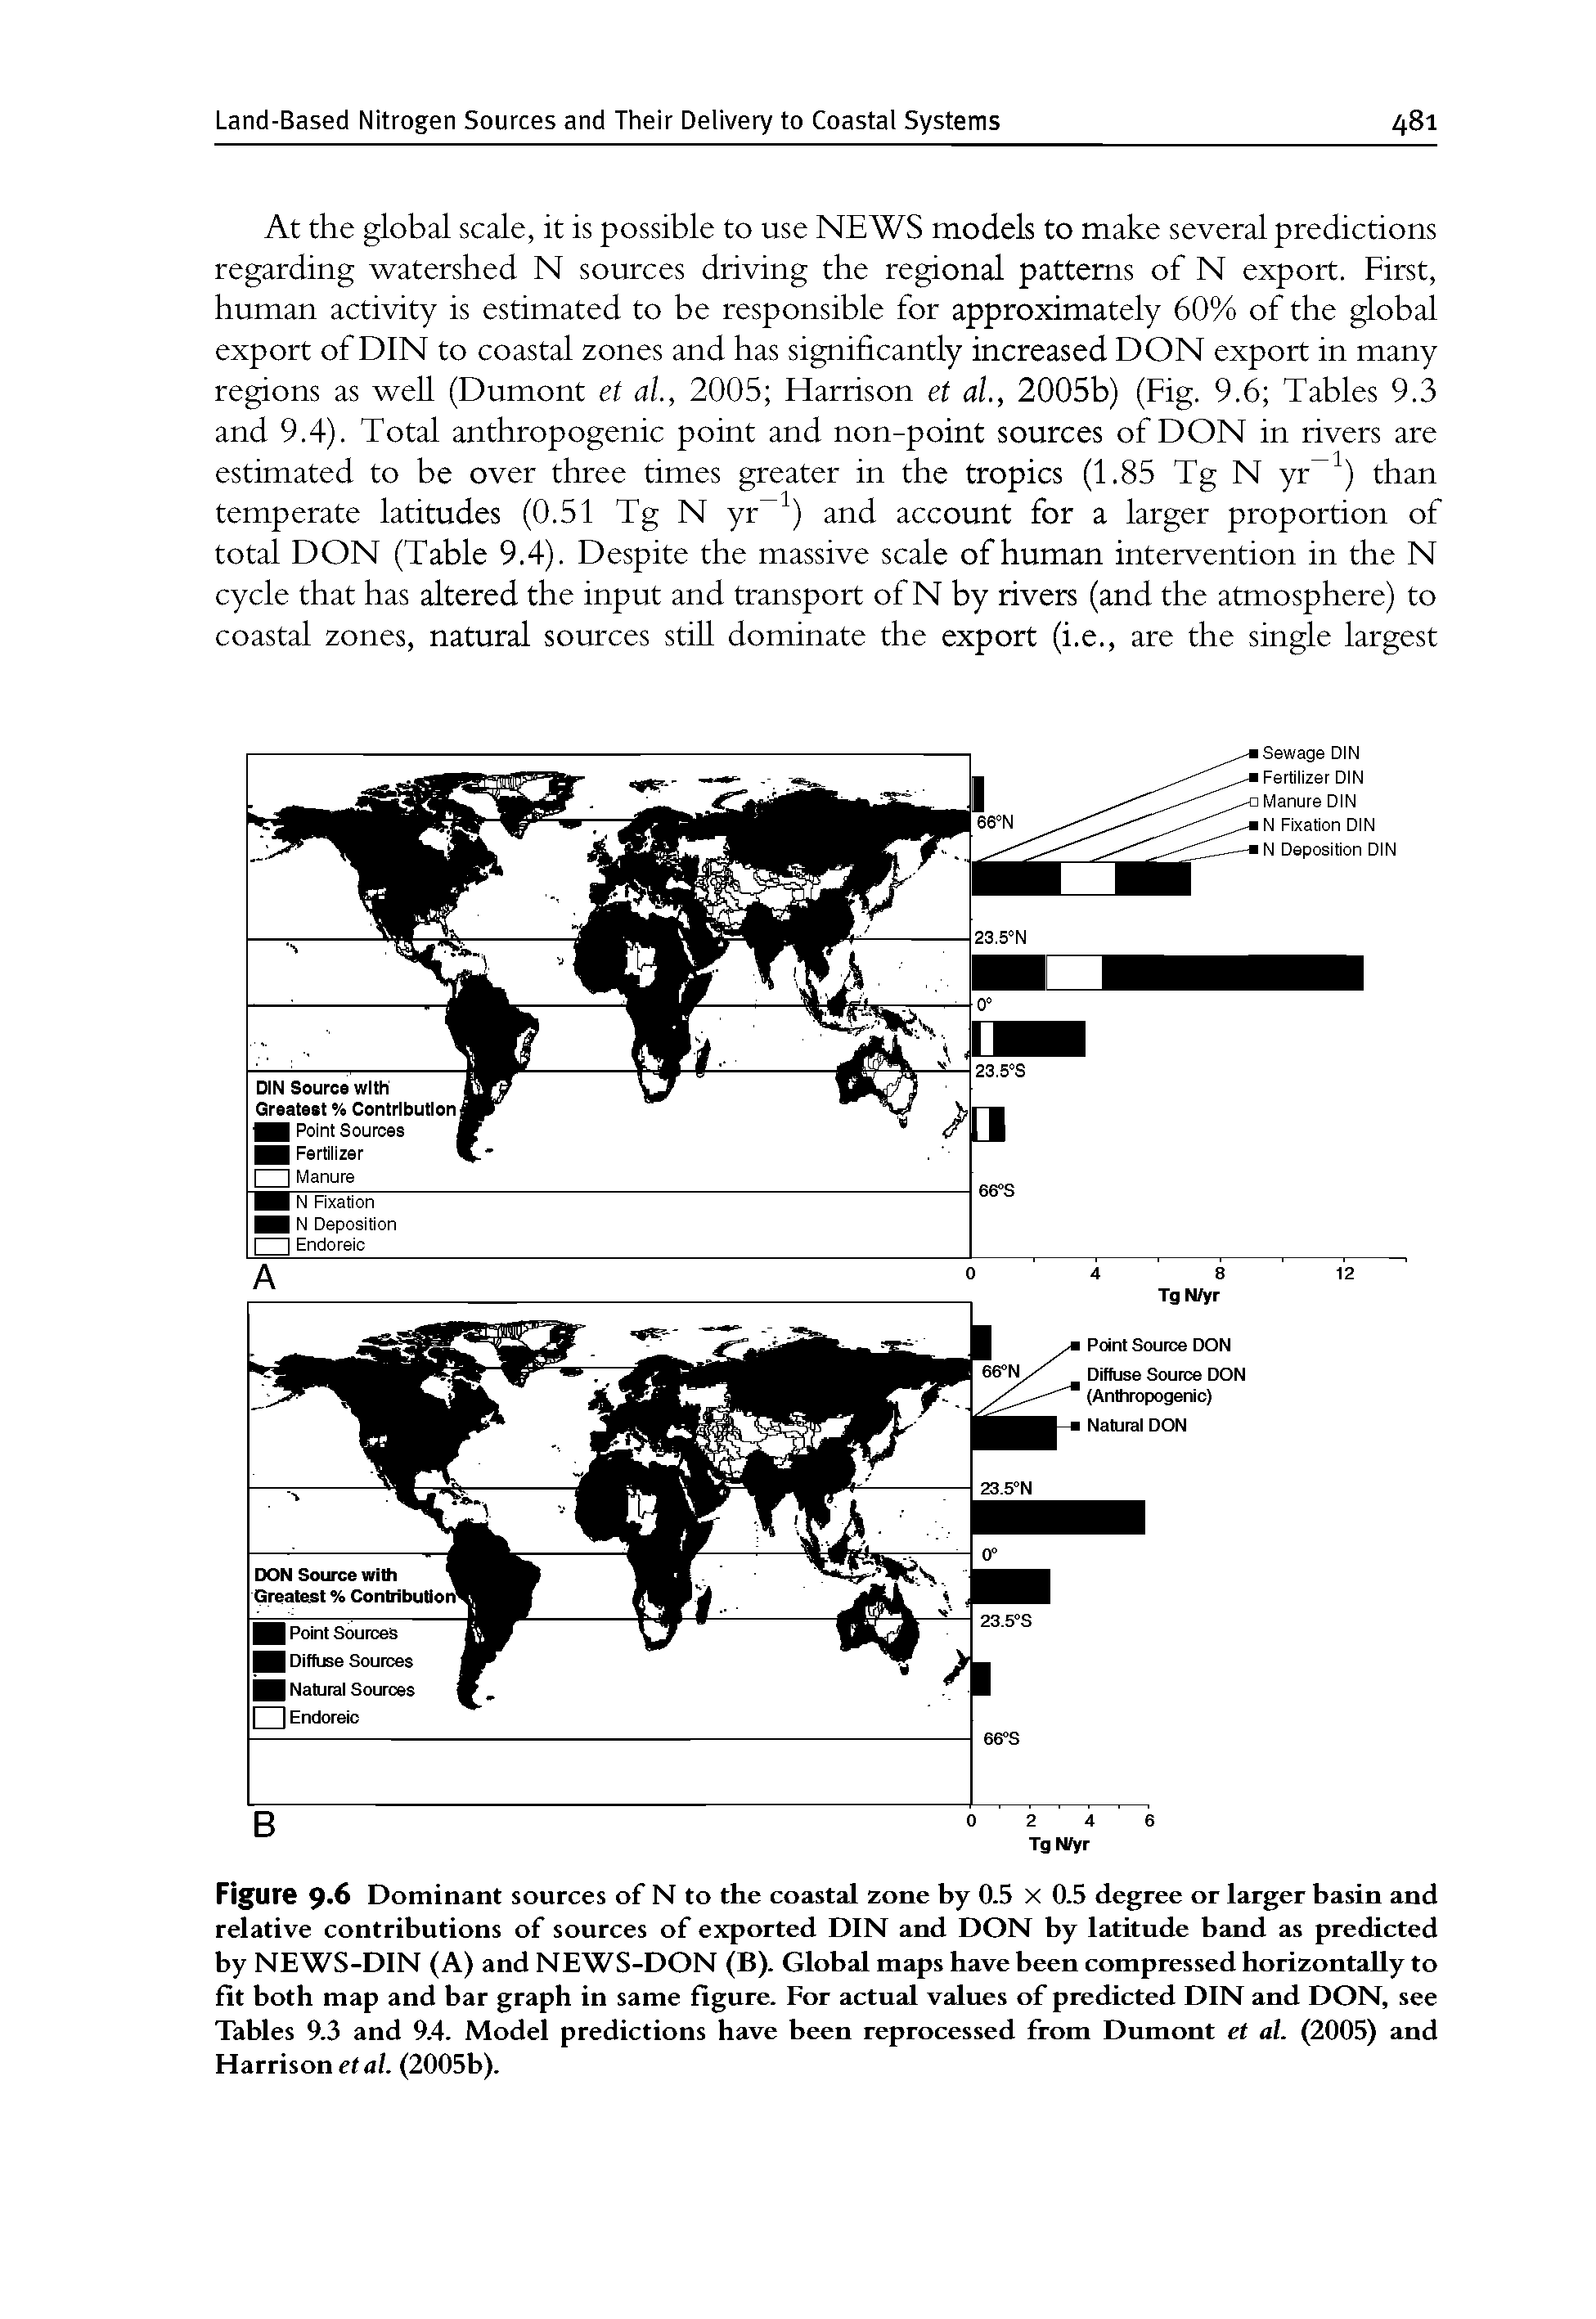 Figure 9 6 Dominant sources of N to the coastal zone by 0.5 X 0.5 degree or larger basin and relative contributions of sources of exported DIN and DON by latitude band as predicted by NEWS-DIN (A) and NEWS-DON (B). Global maps have been compressed horizontally to fit both map and bar graph in same figure. For actual values of predicted DIN and DON, see Tables 9.3 and 9.4. Model predictions have been reprocessed from Dumont et al. (2005) and Harrison etal. (2005b).